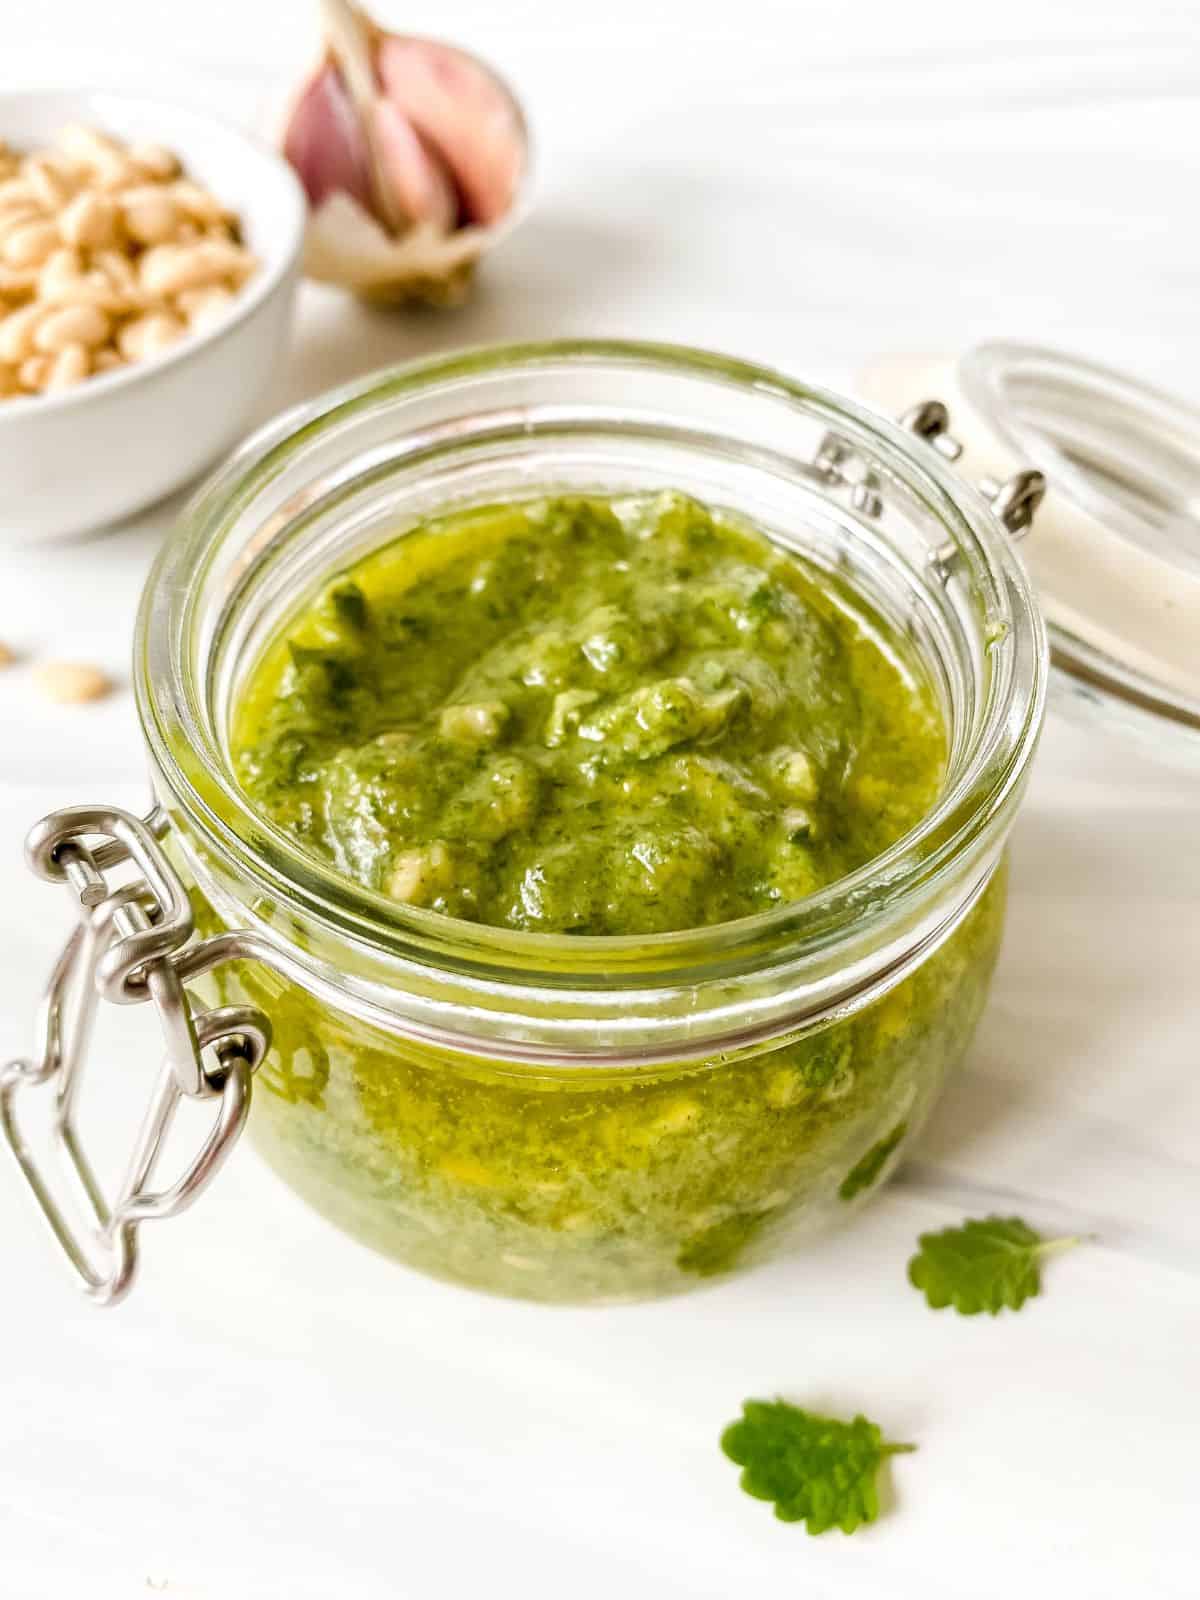 lemon balm pesto in a glass jar with a bowl of pine nuts and garlic in the background.